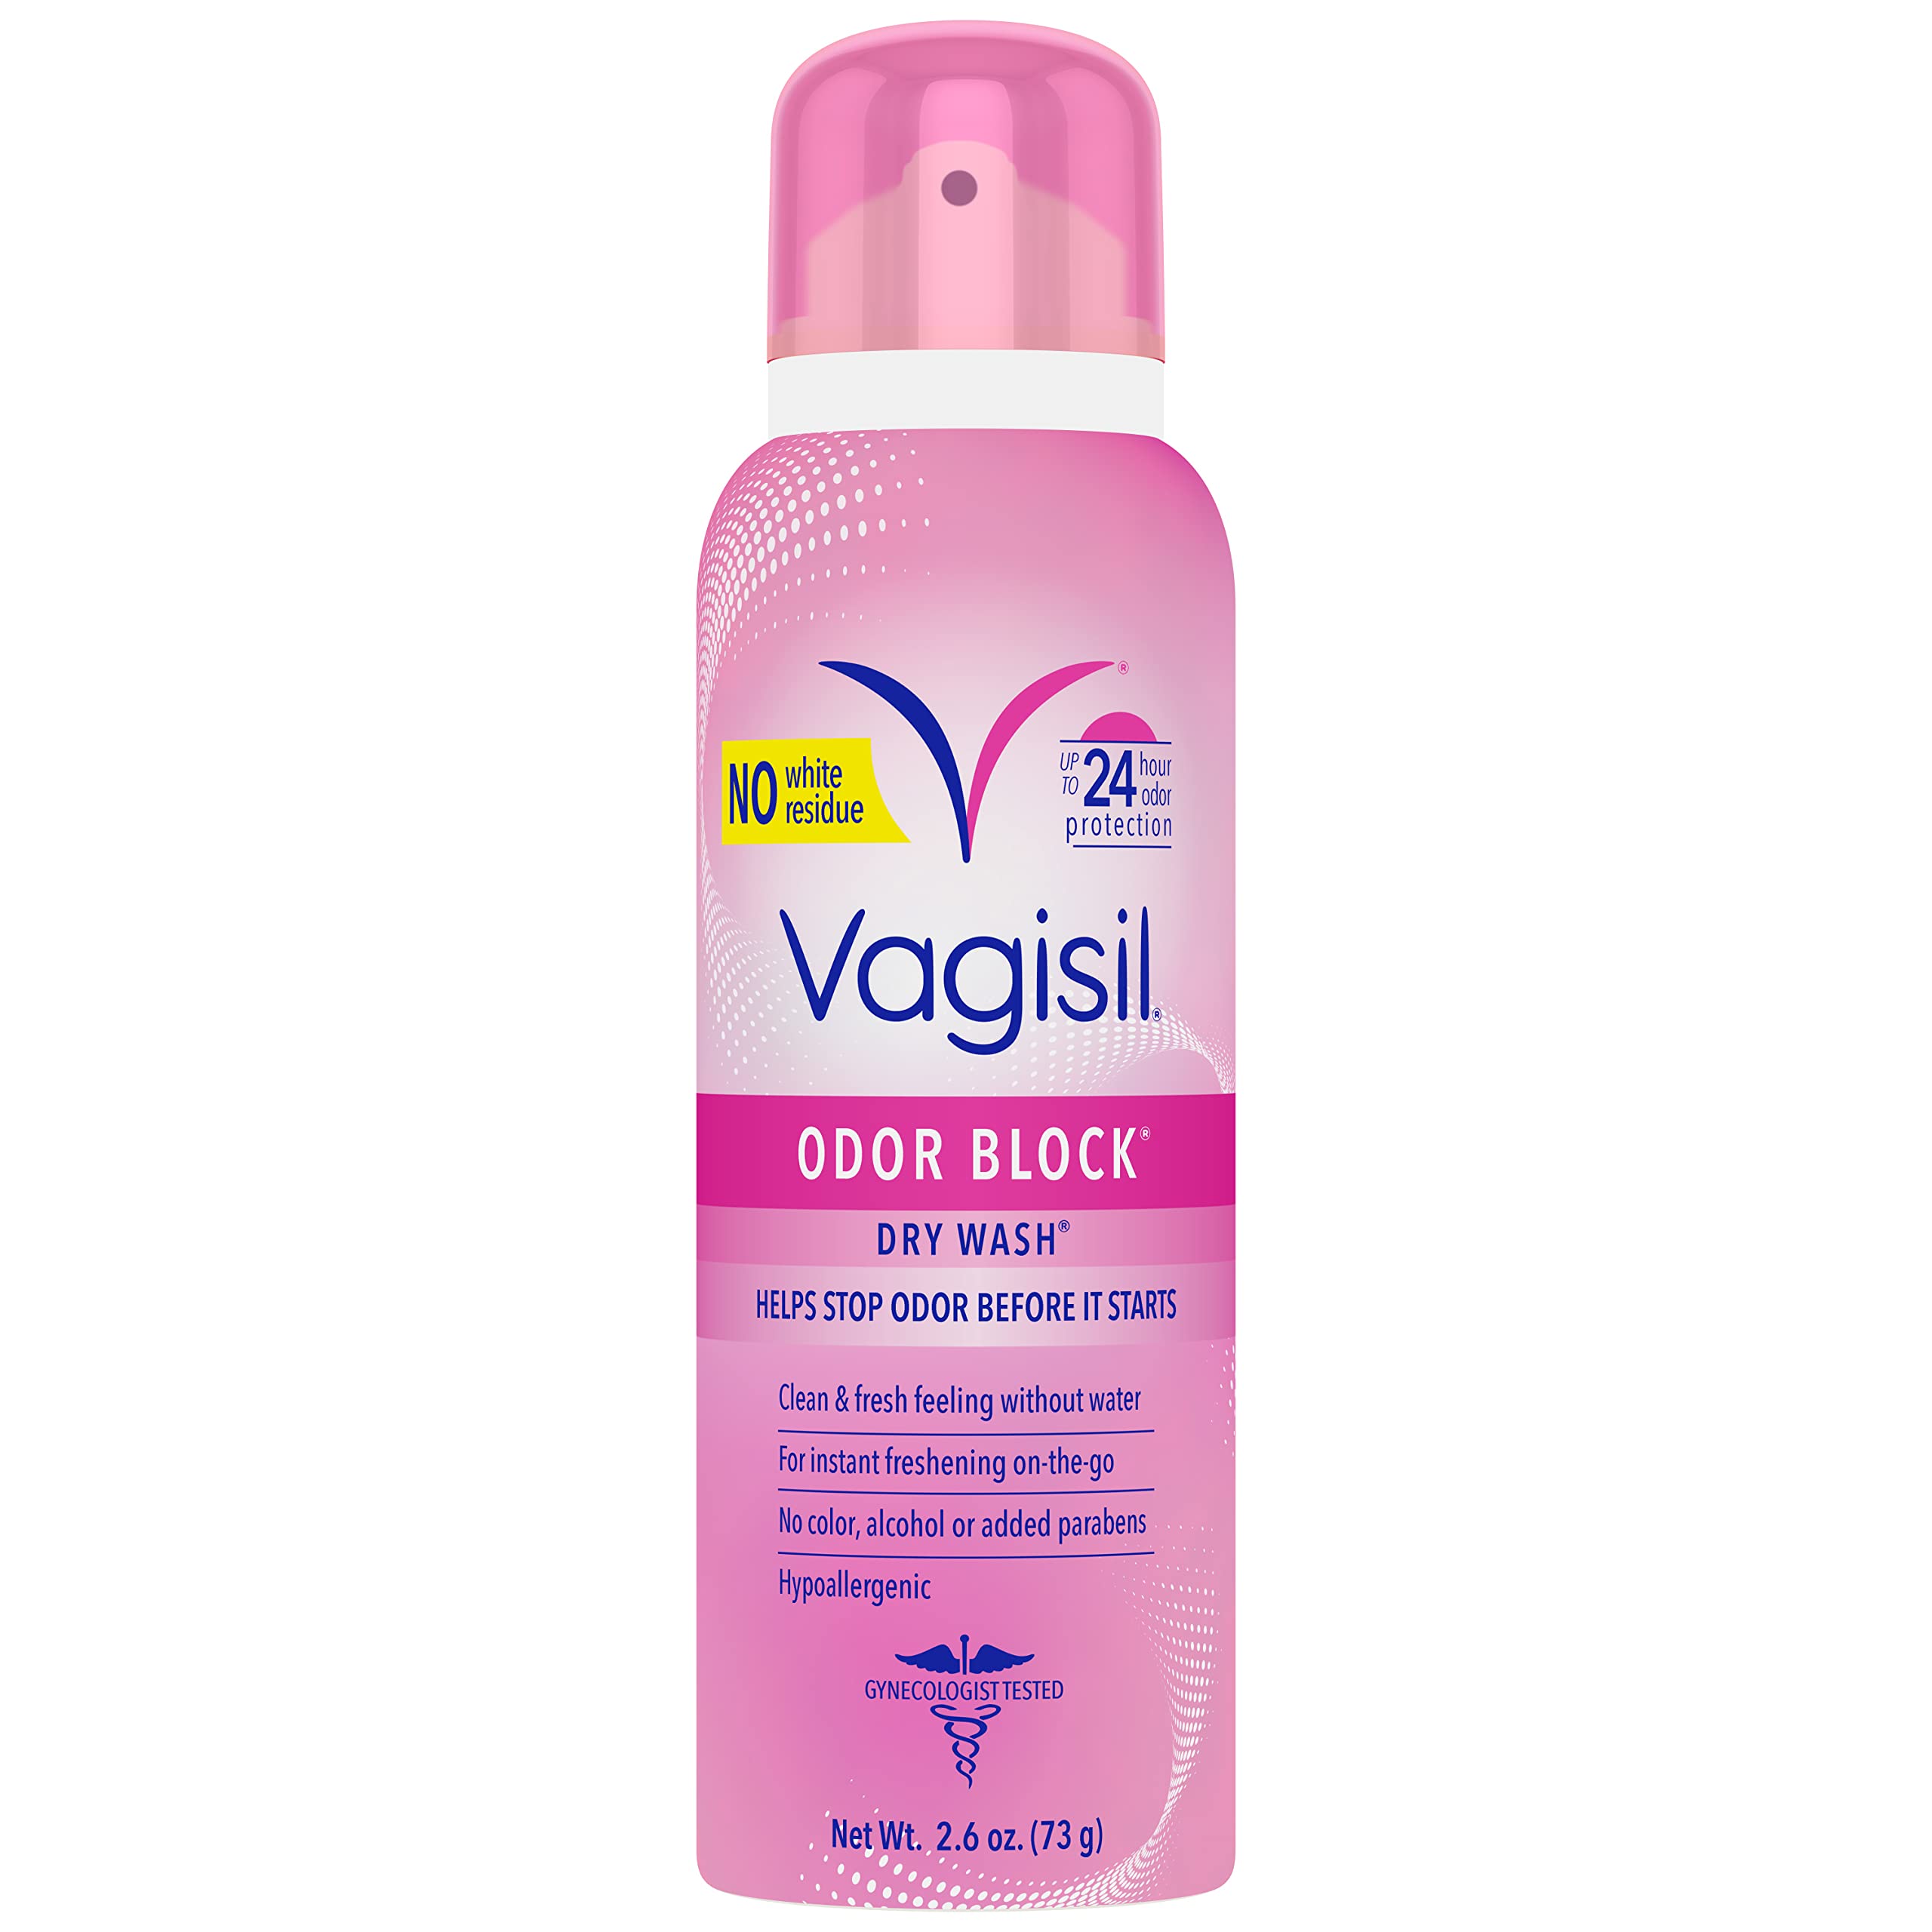 Vagisil Odor Block Dry Wash Spray for Feminine Hygiene, Gynecologist Tested, 2.6 Ounces (Packaging May Vary)